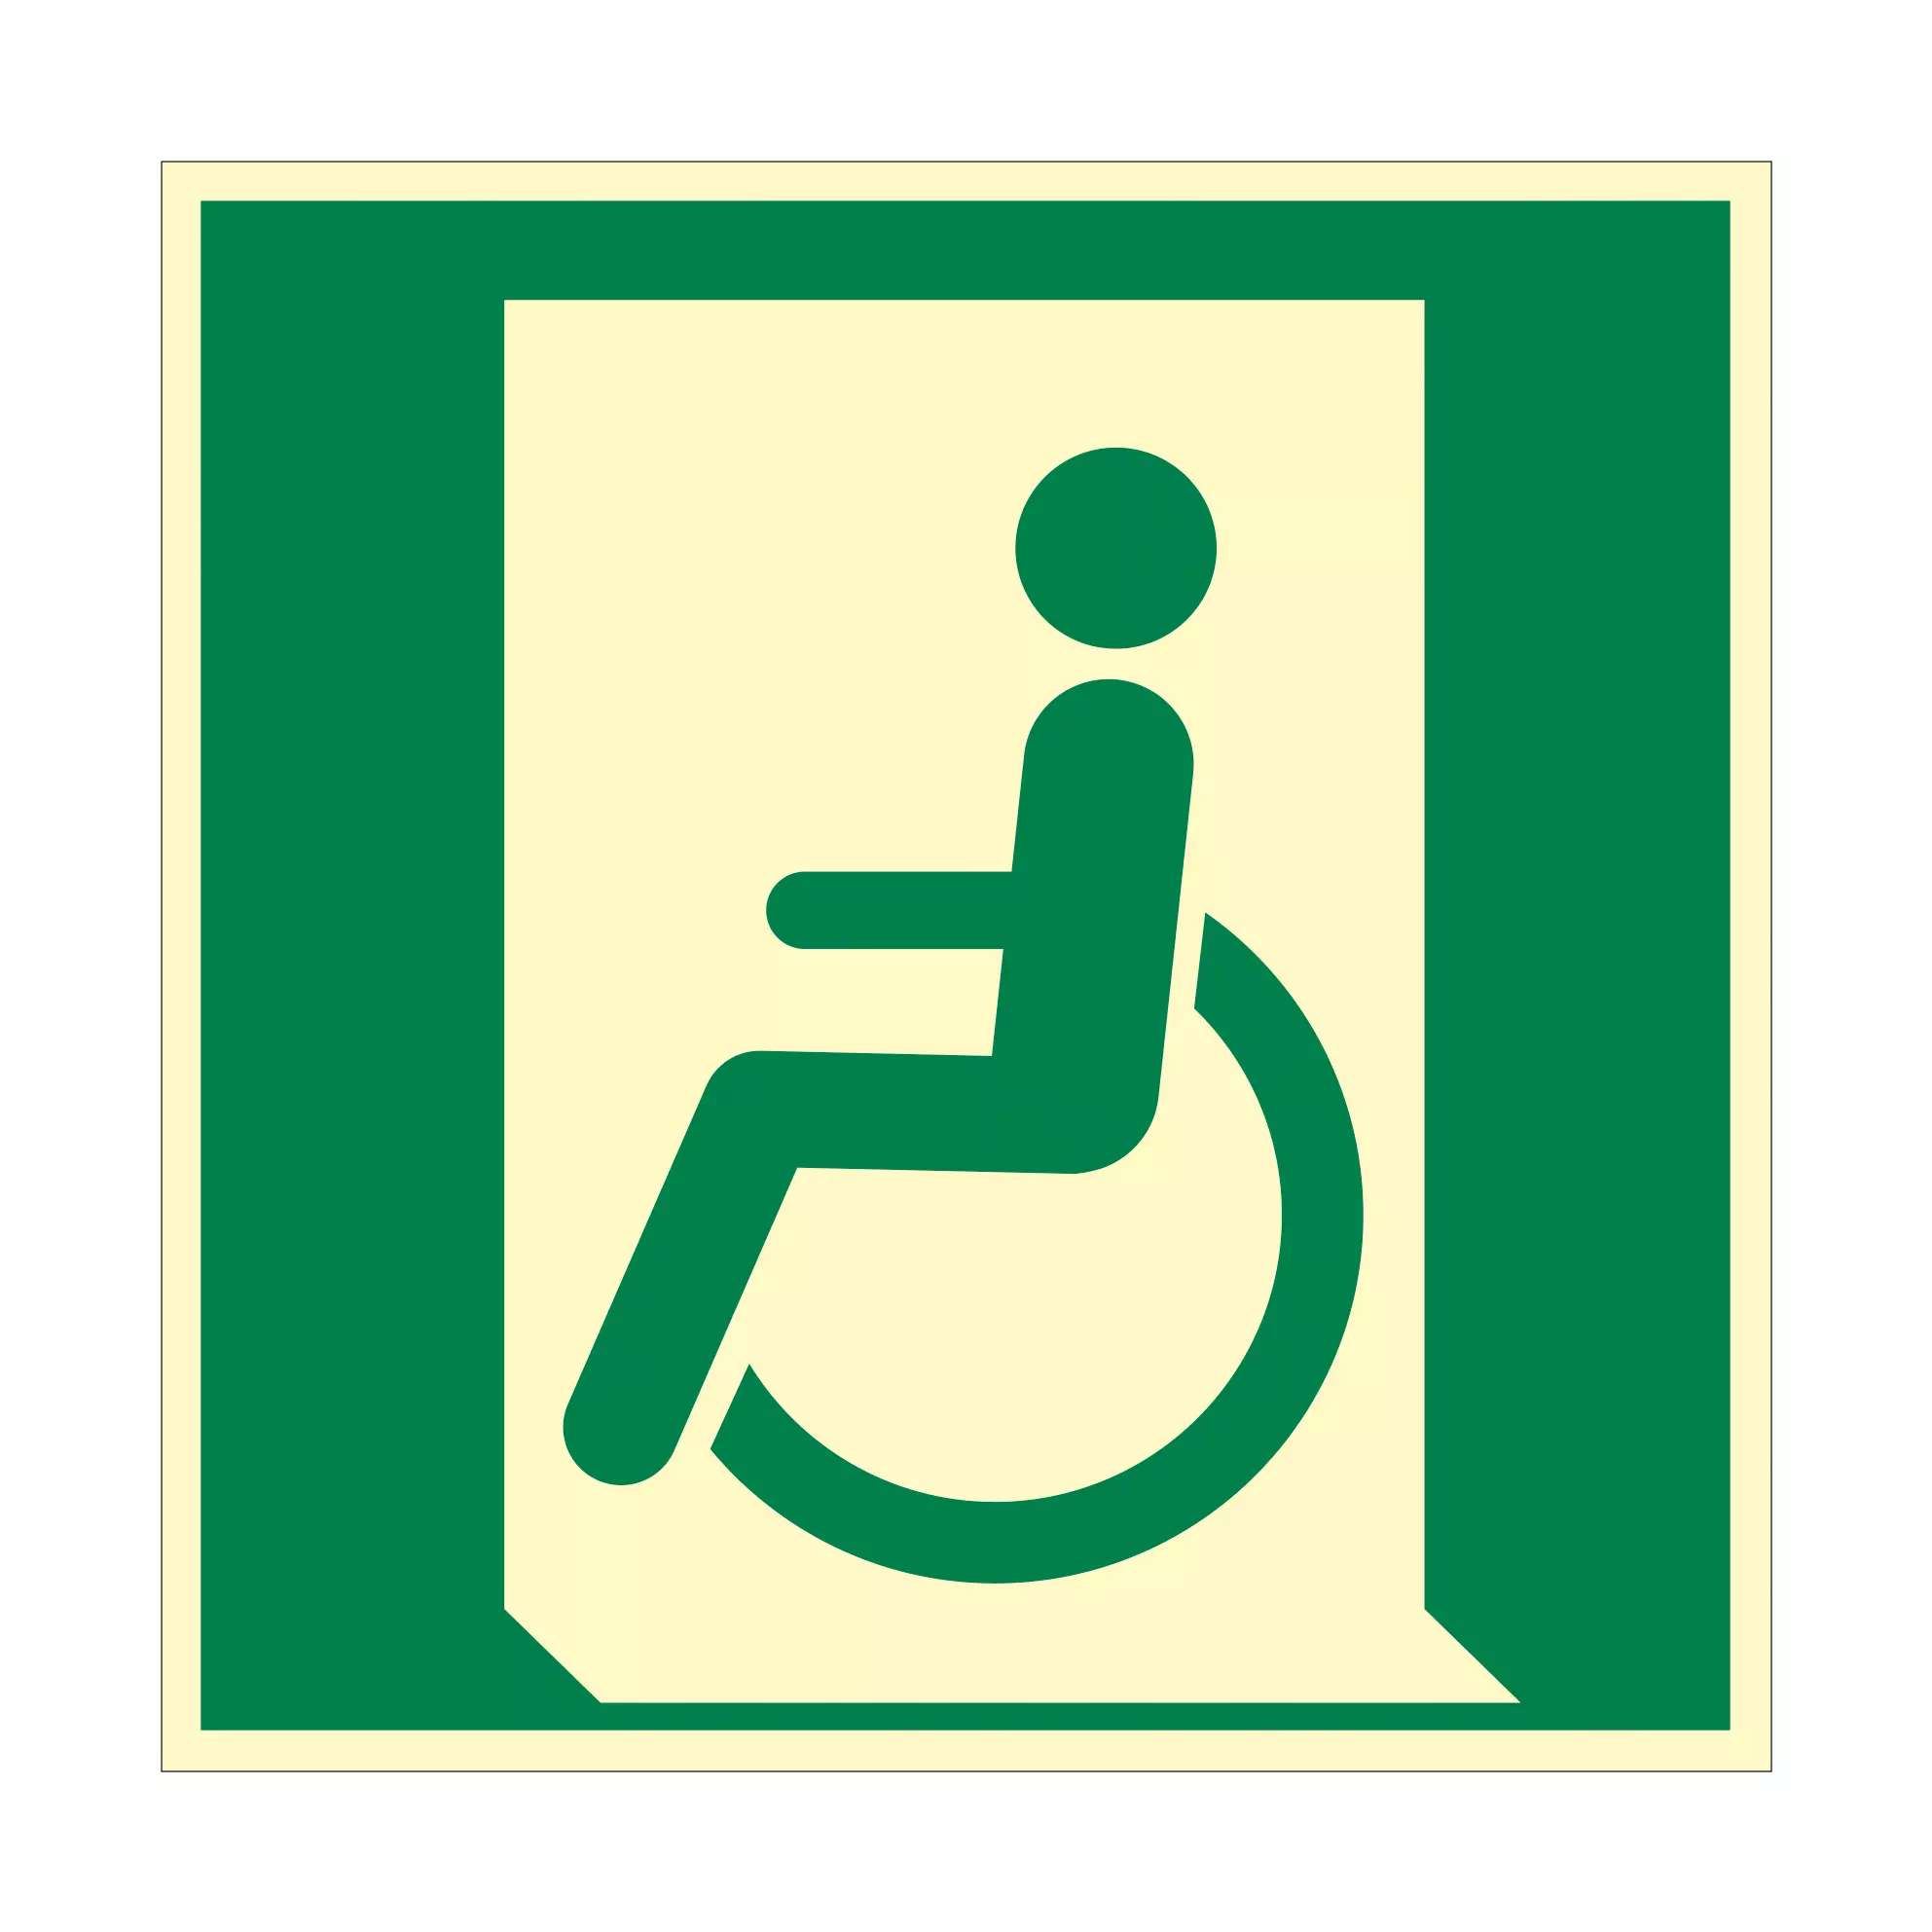 Escape sign - Emergency exit for persons unable to walk or with impaired mobility - left